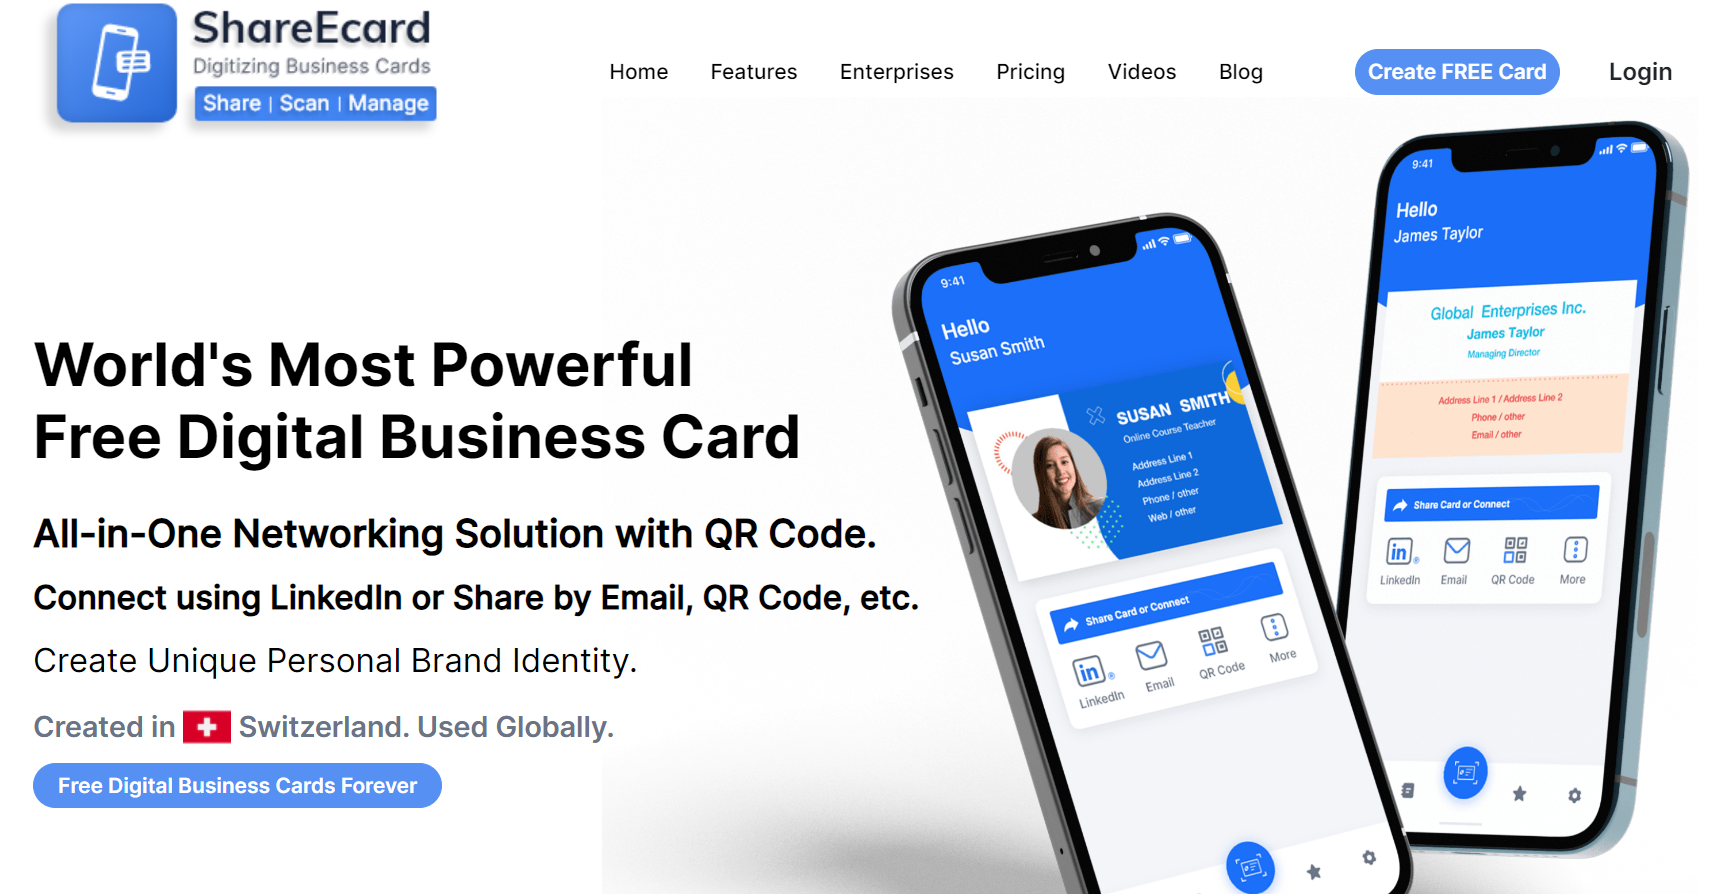 How to use ShareEcard to manage and scan paper business cards from others